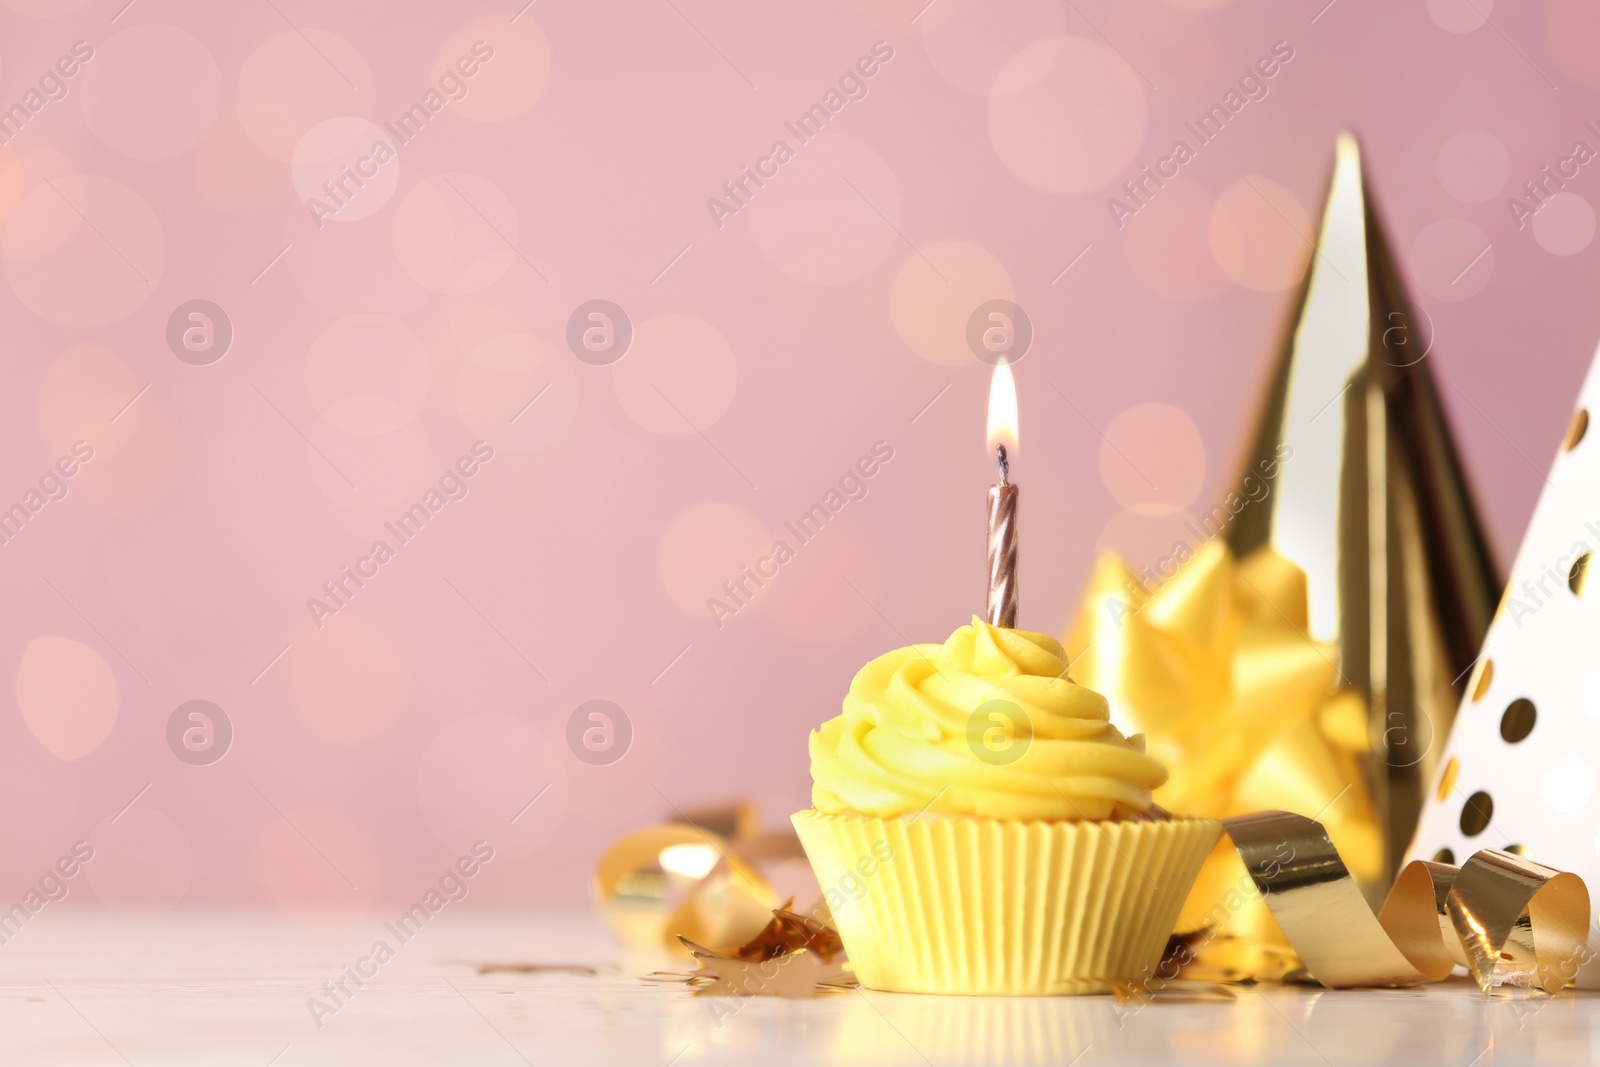 Photo of Delicious birthday cupcake with cream and burning candle on white table. Space for text